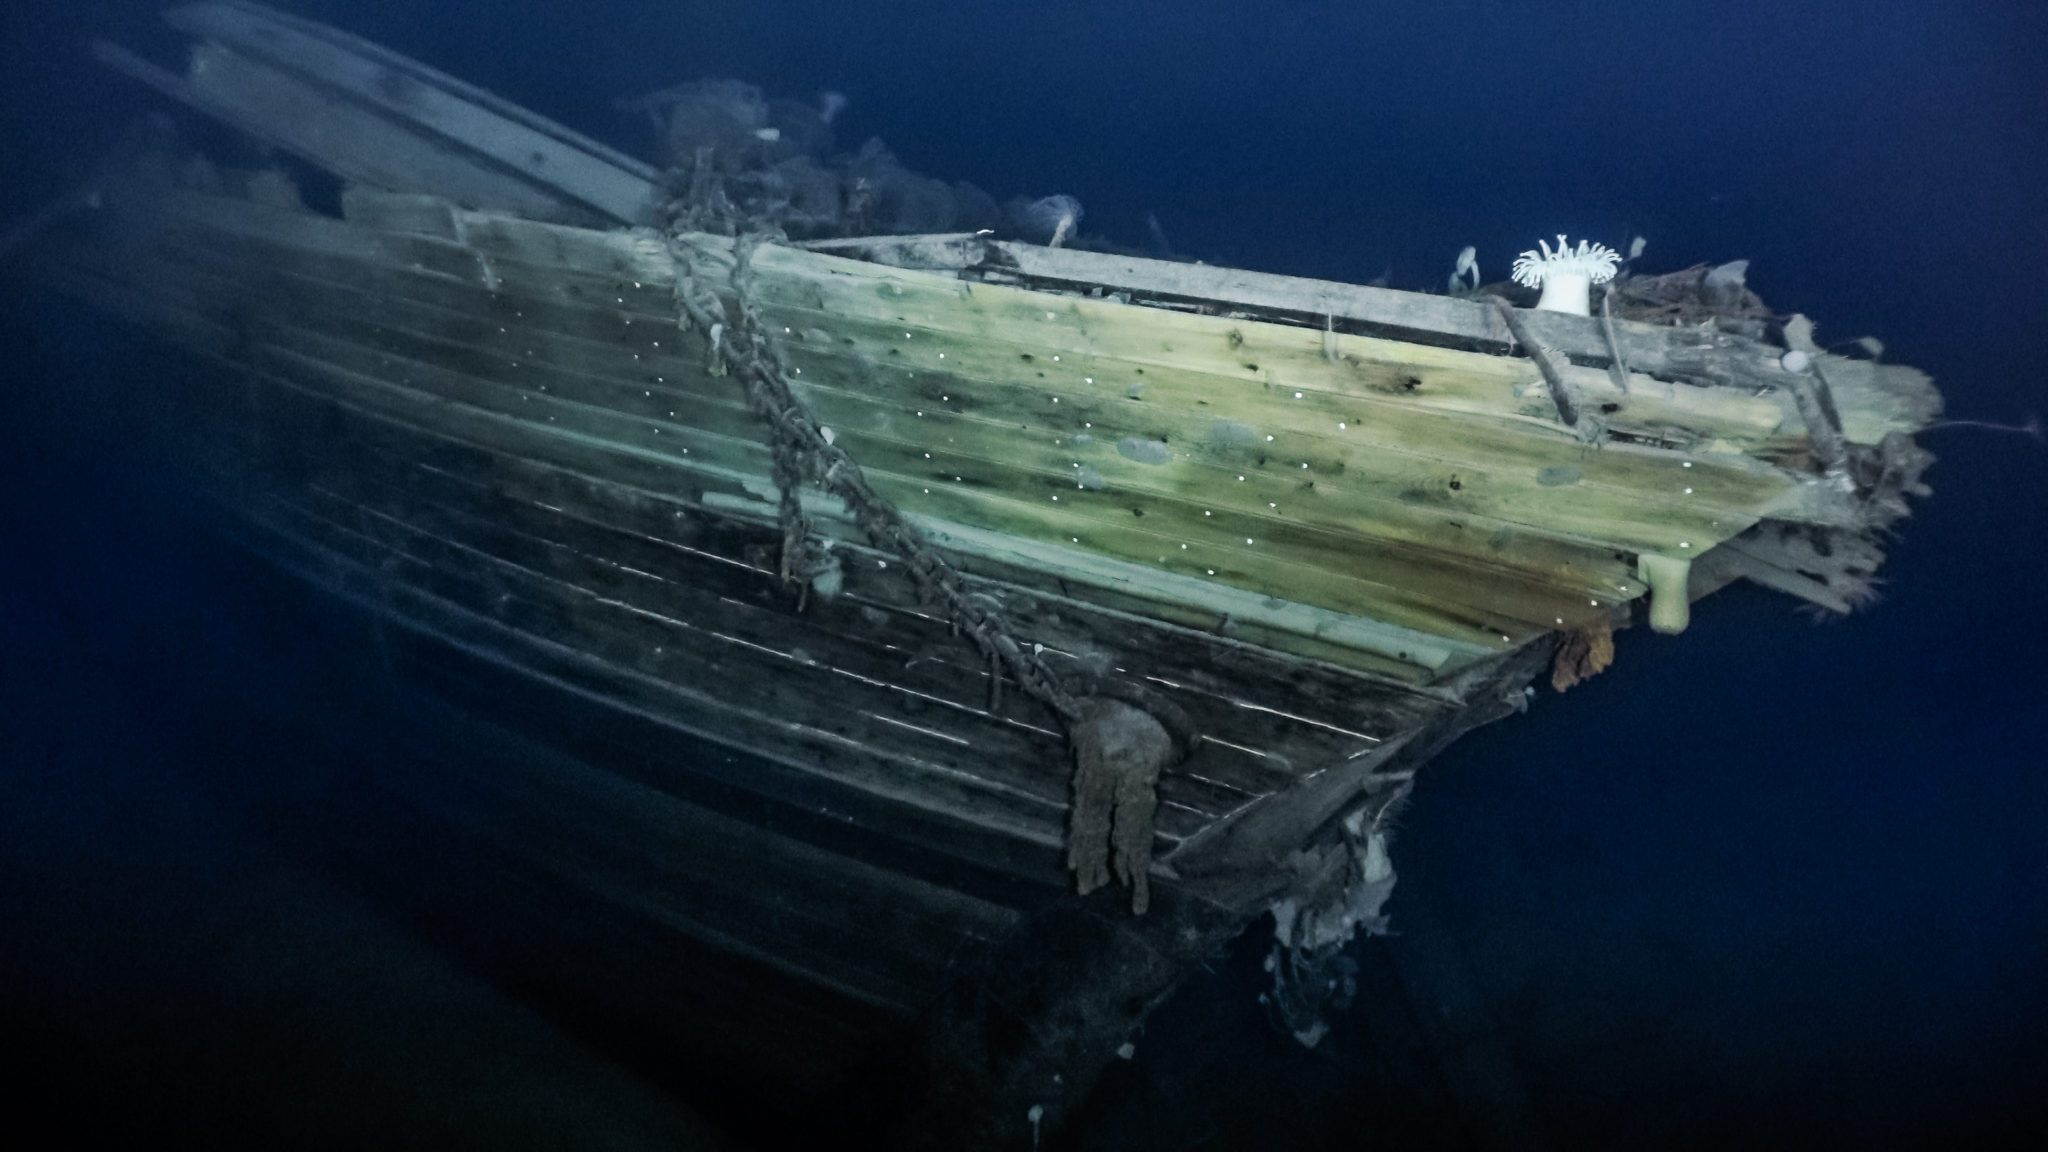 The Endurance discovered after 107 years. Image: Falklands Maritime Heritage Trust 